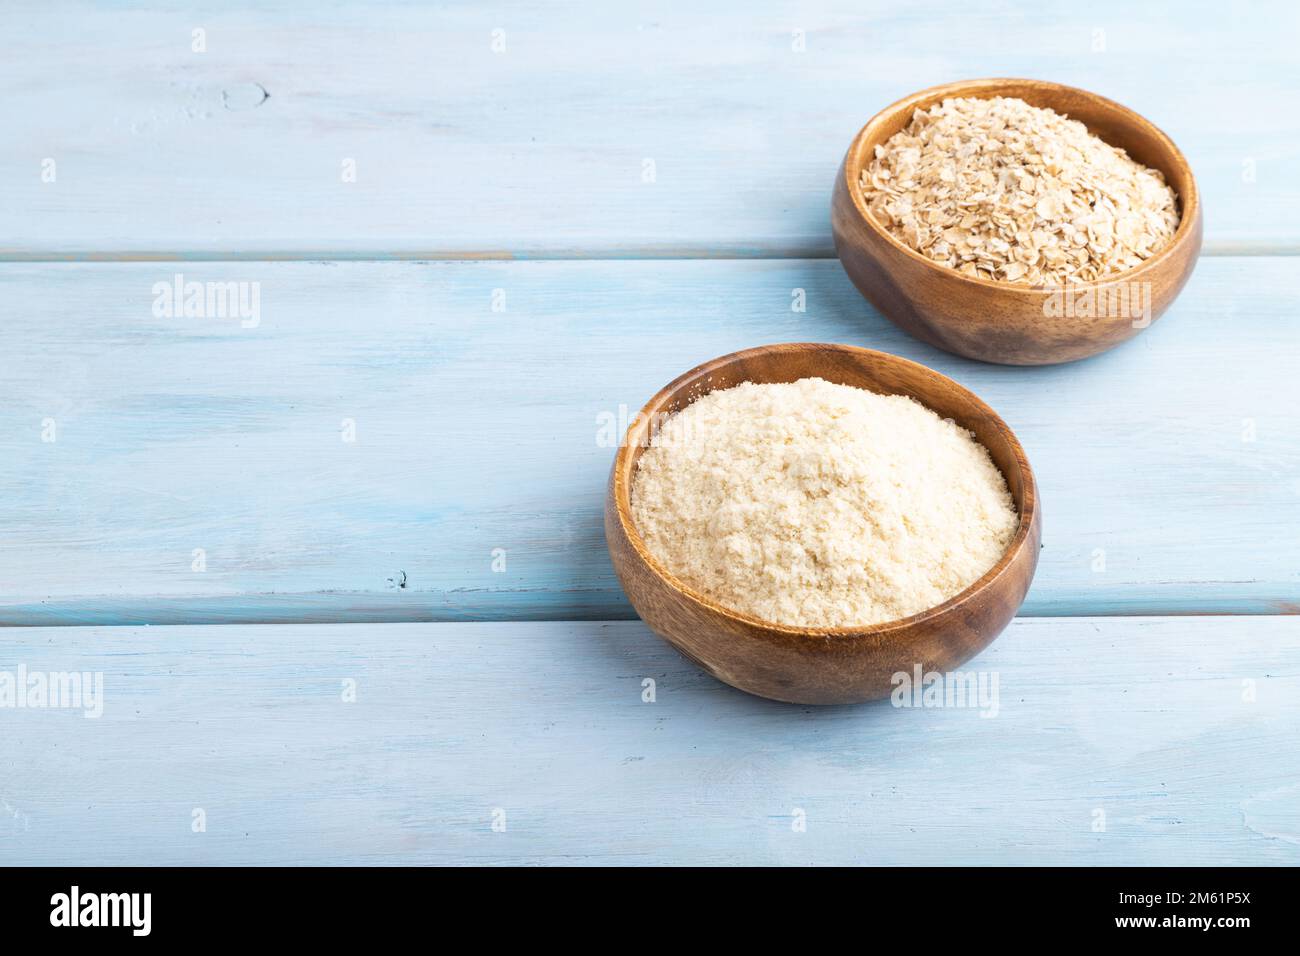 Powdered milk and oatmeal baby food mix, infant formula on blue wooden background. Side view, copy space, artificial feeding concept. Stock Photo